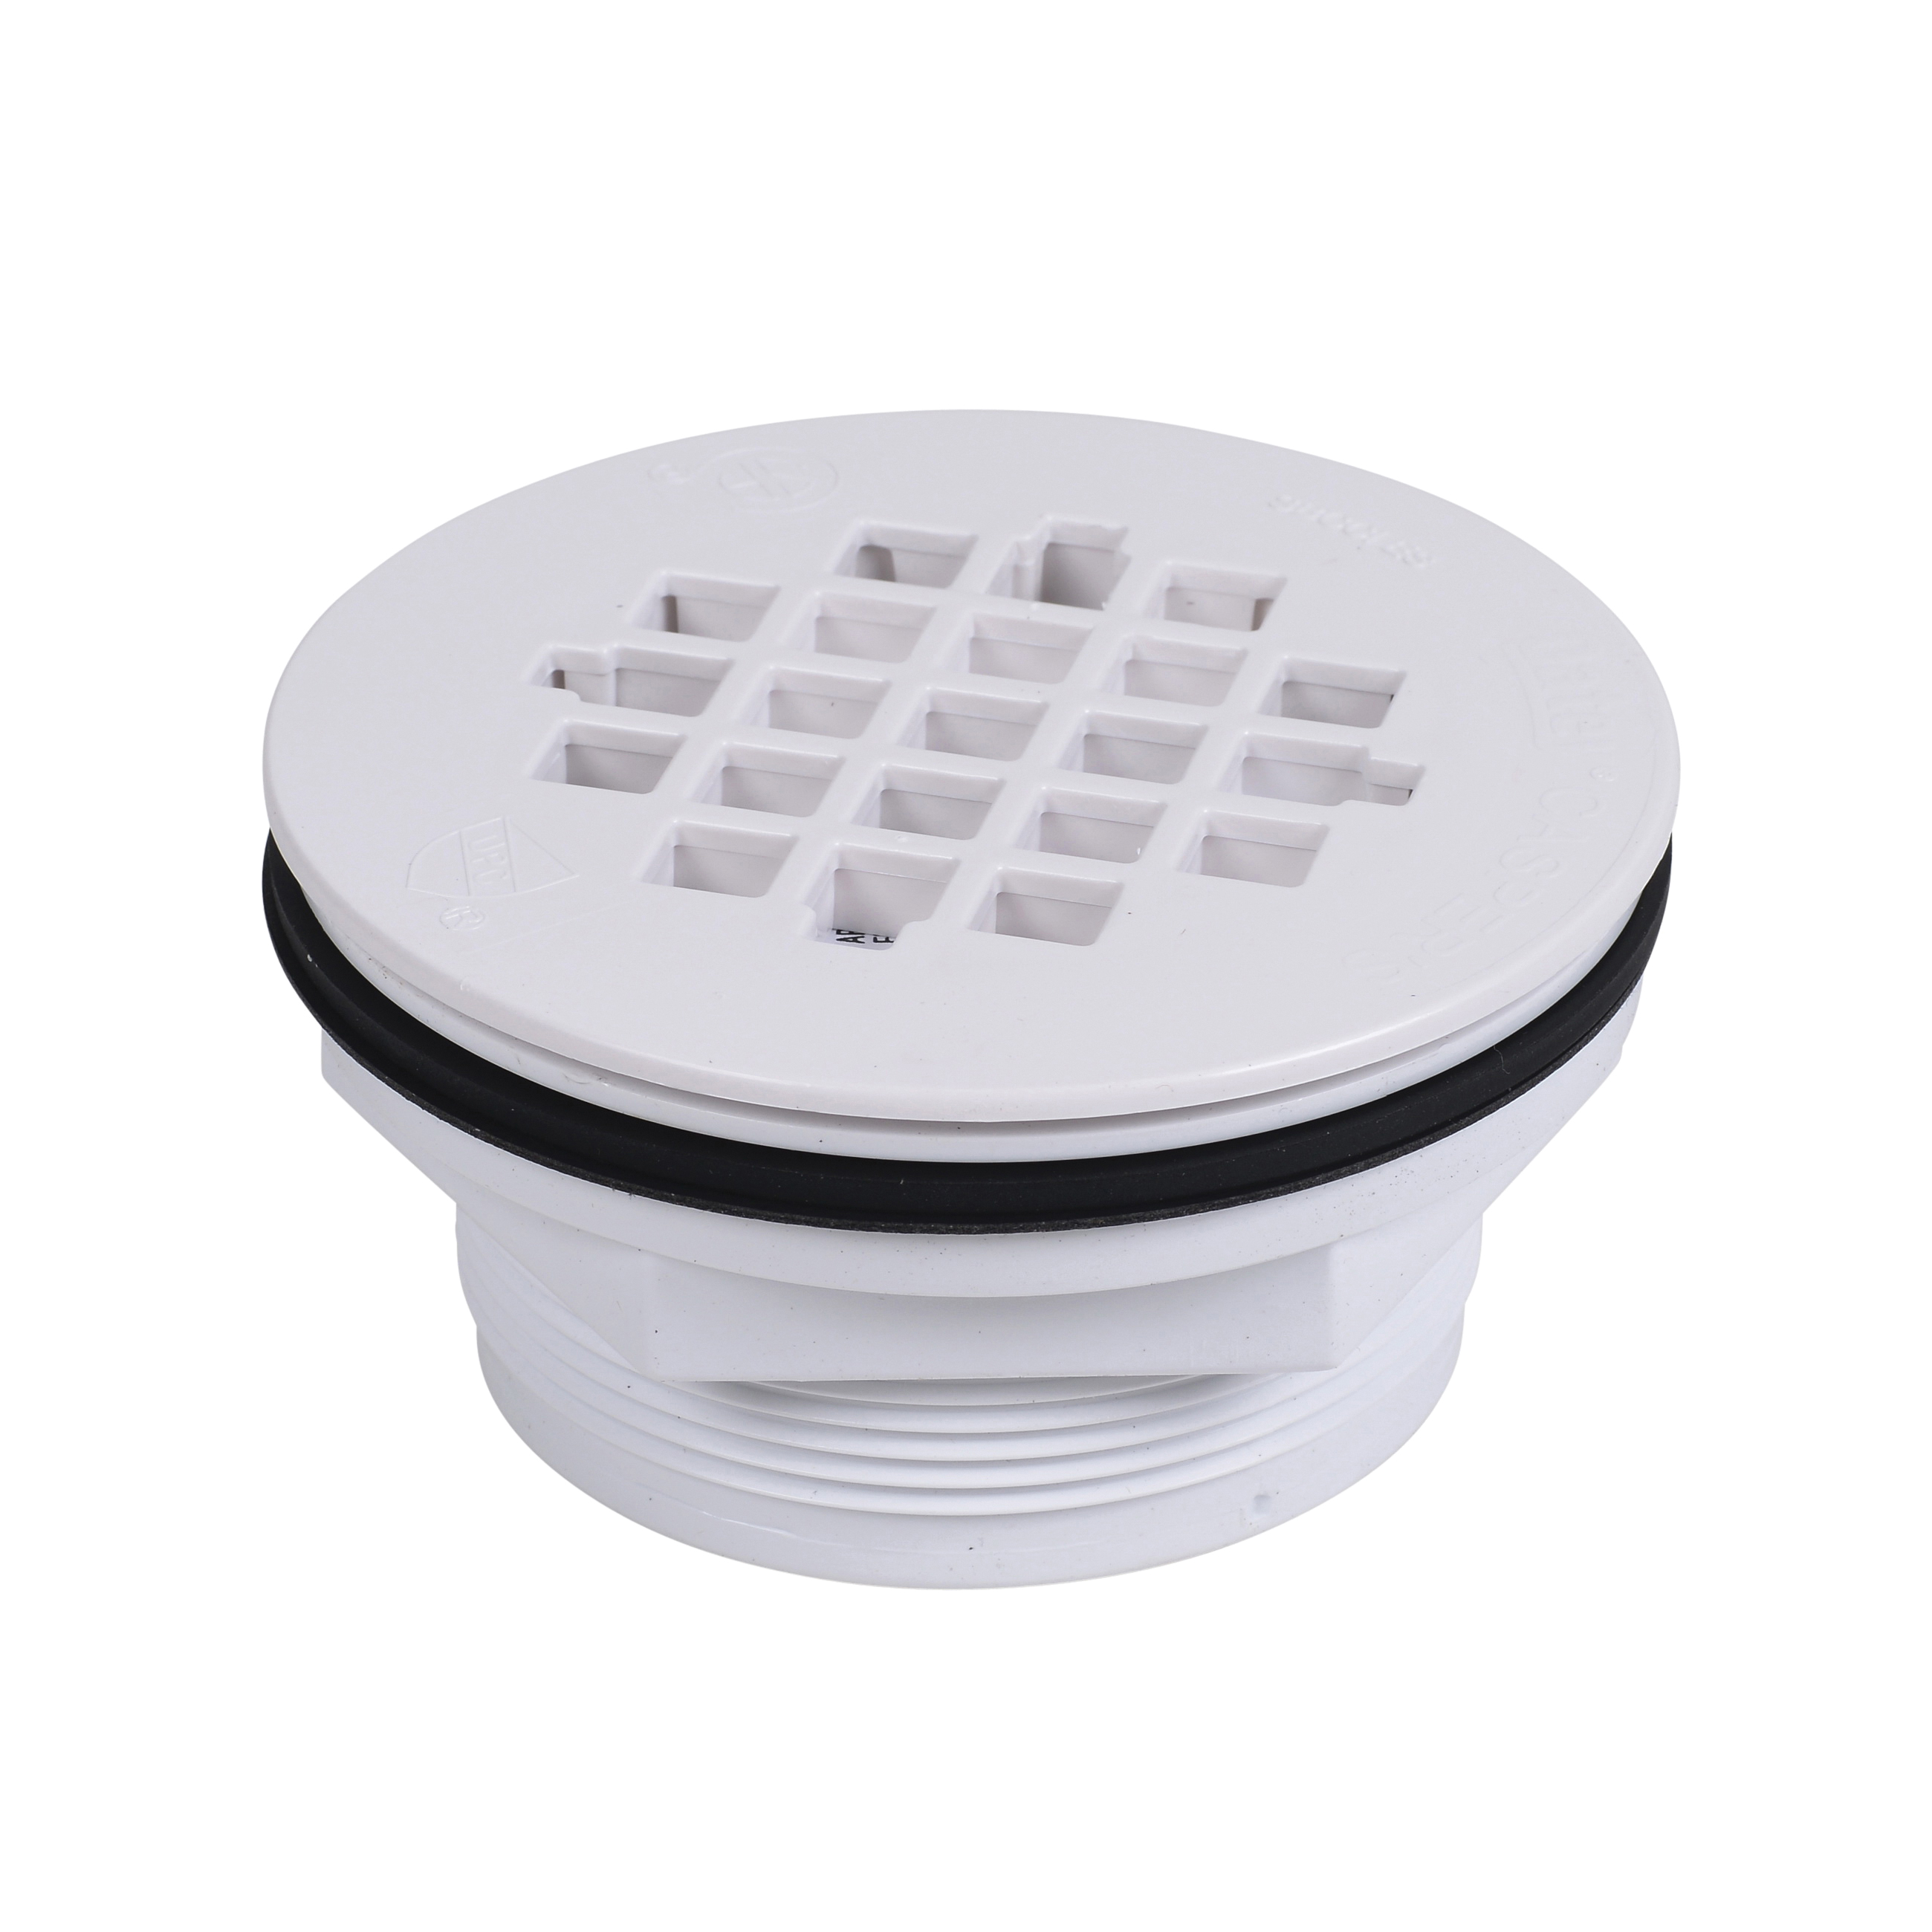 Oatey® 42075 101PNC Shower Drain With Plastic Strainer, 2 in Nominal, No Caulk Connection, PVC Drain, Domestic